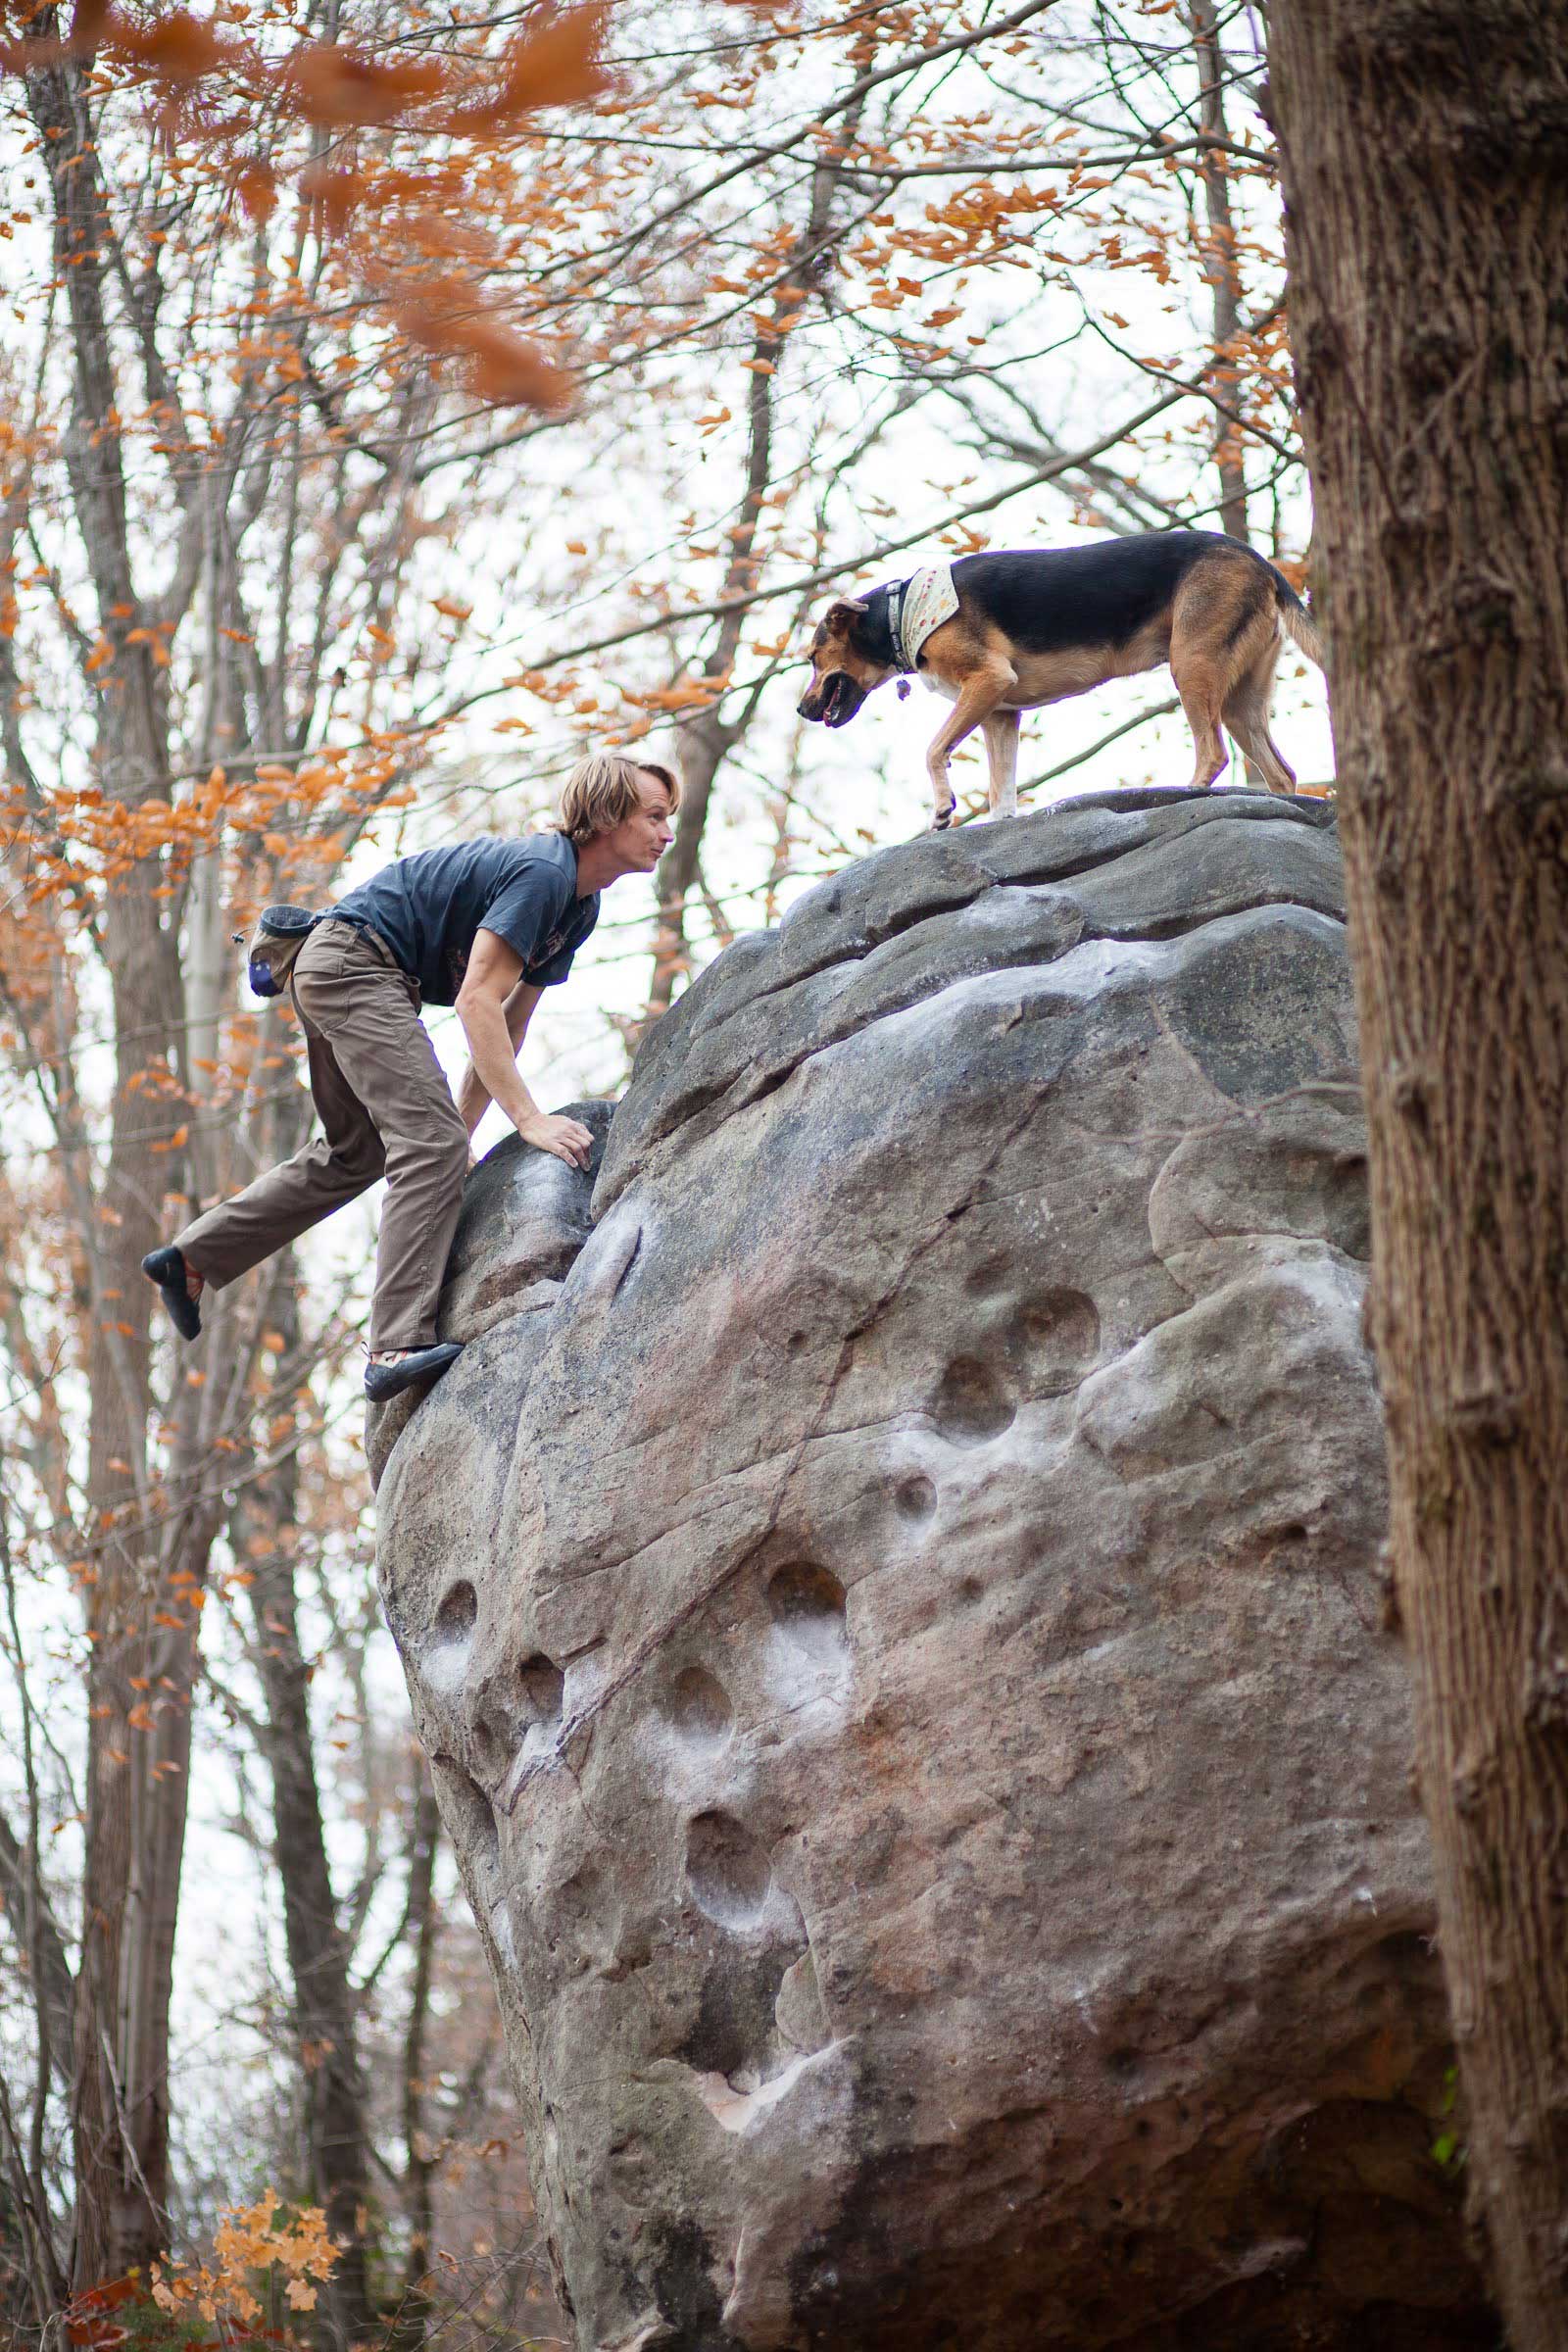 Guy climbing with his dog